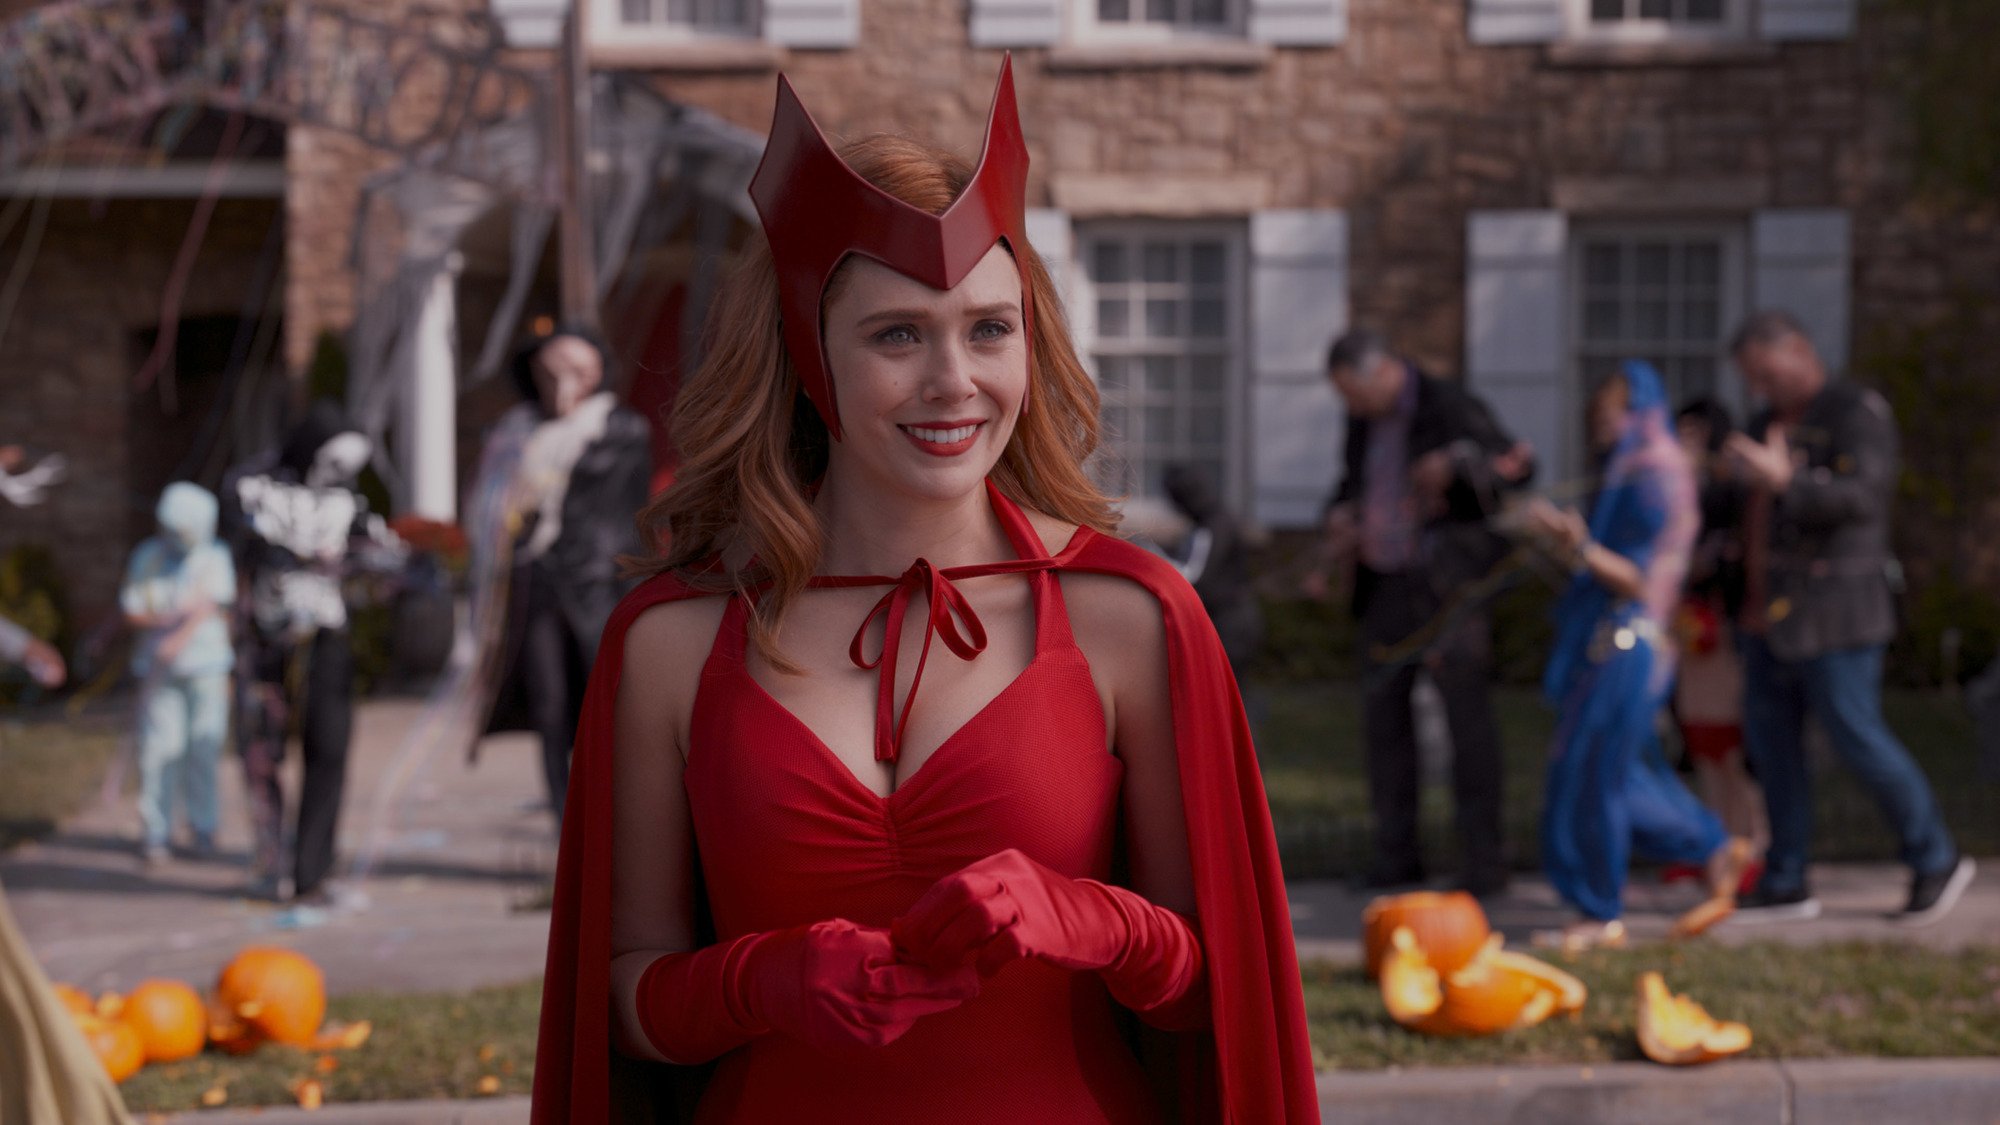 Elizabeth Olsen as Wanda Maximoff in 'WandaVision.' She's wearing a Halloween costume that resembles Scarlet Witch's comics getup.